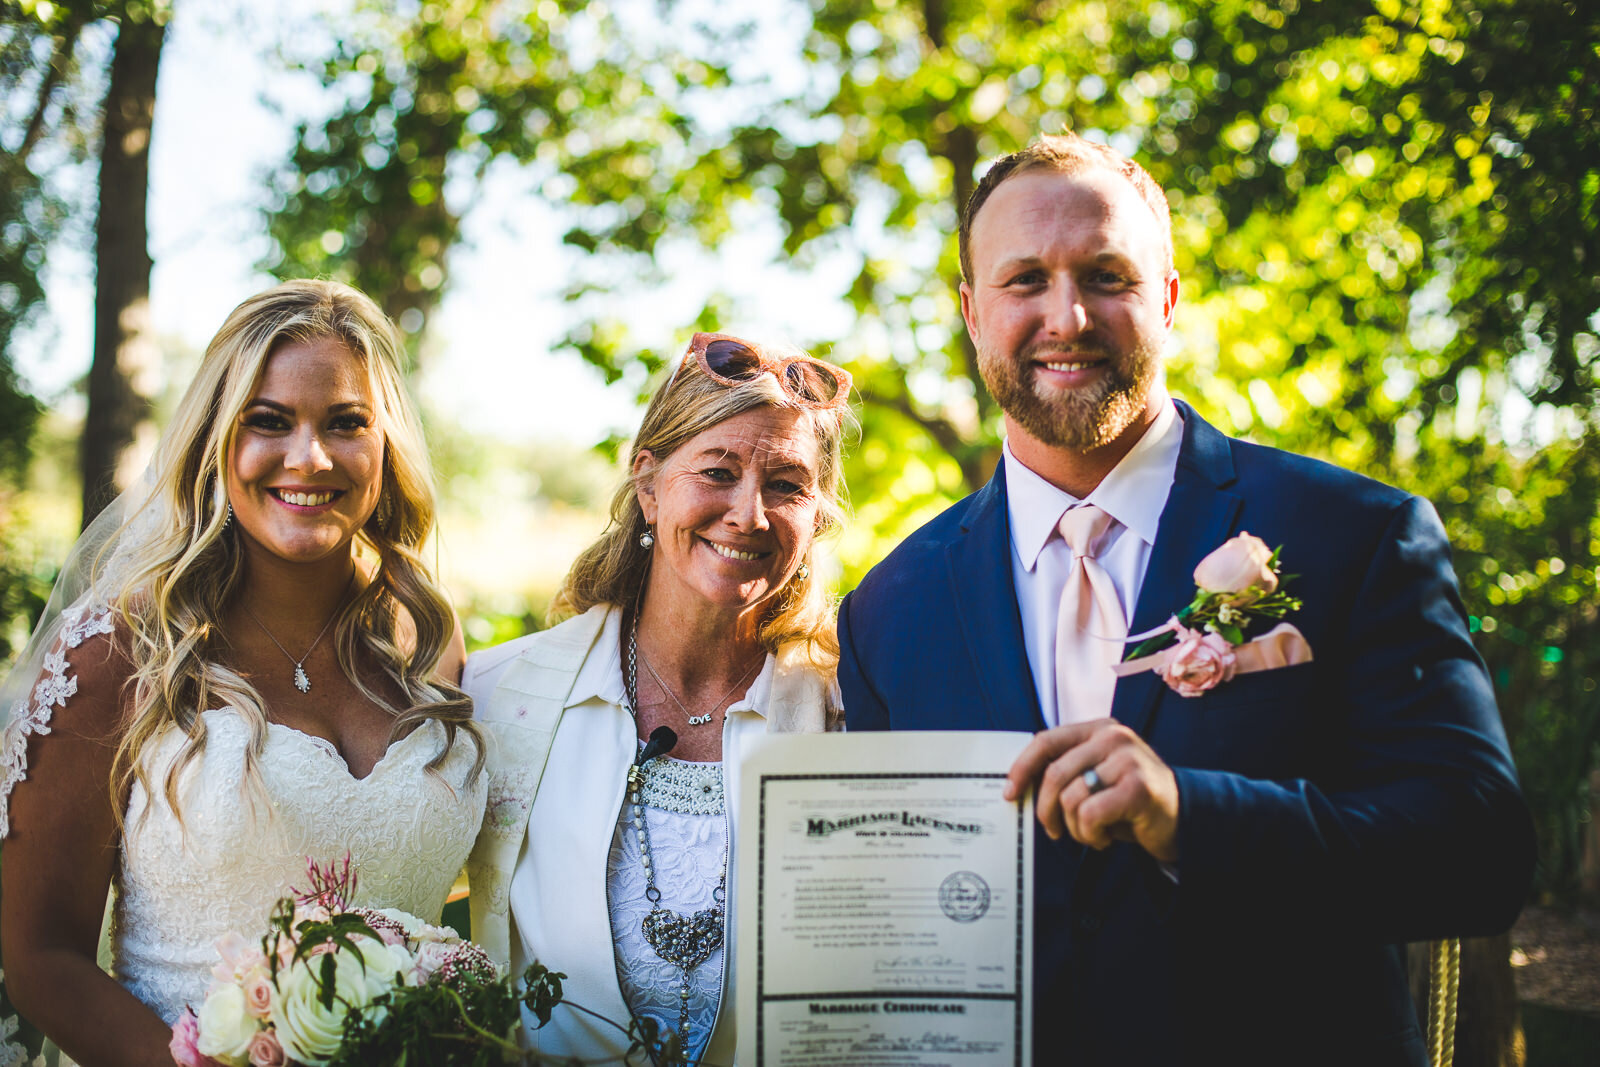 Wedding officiant and celebrant standing between married couple holding the marriage license 